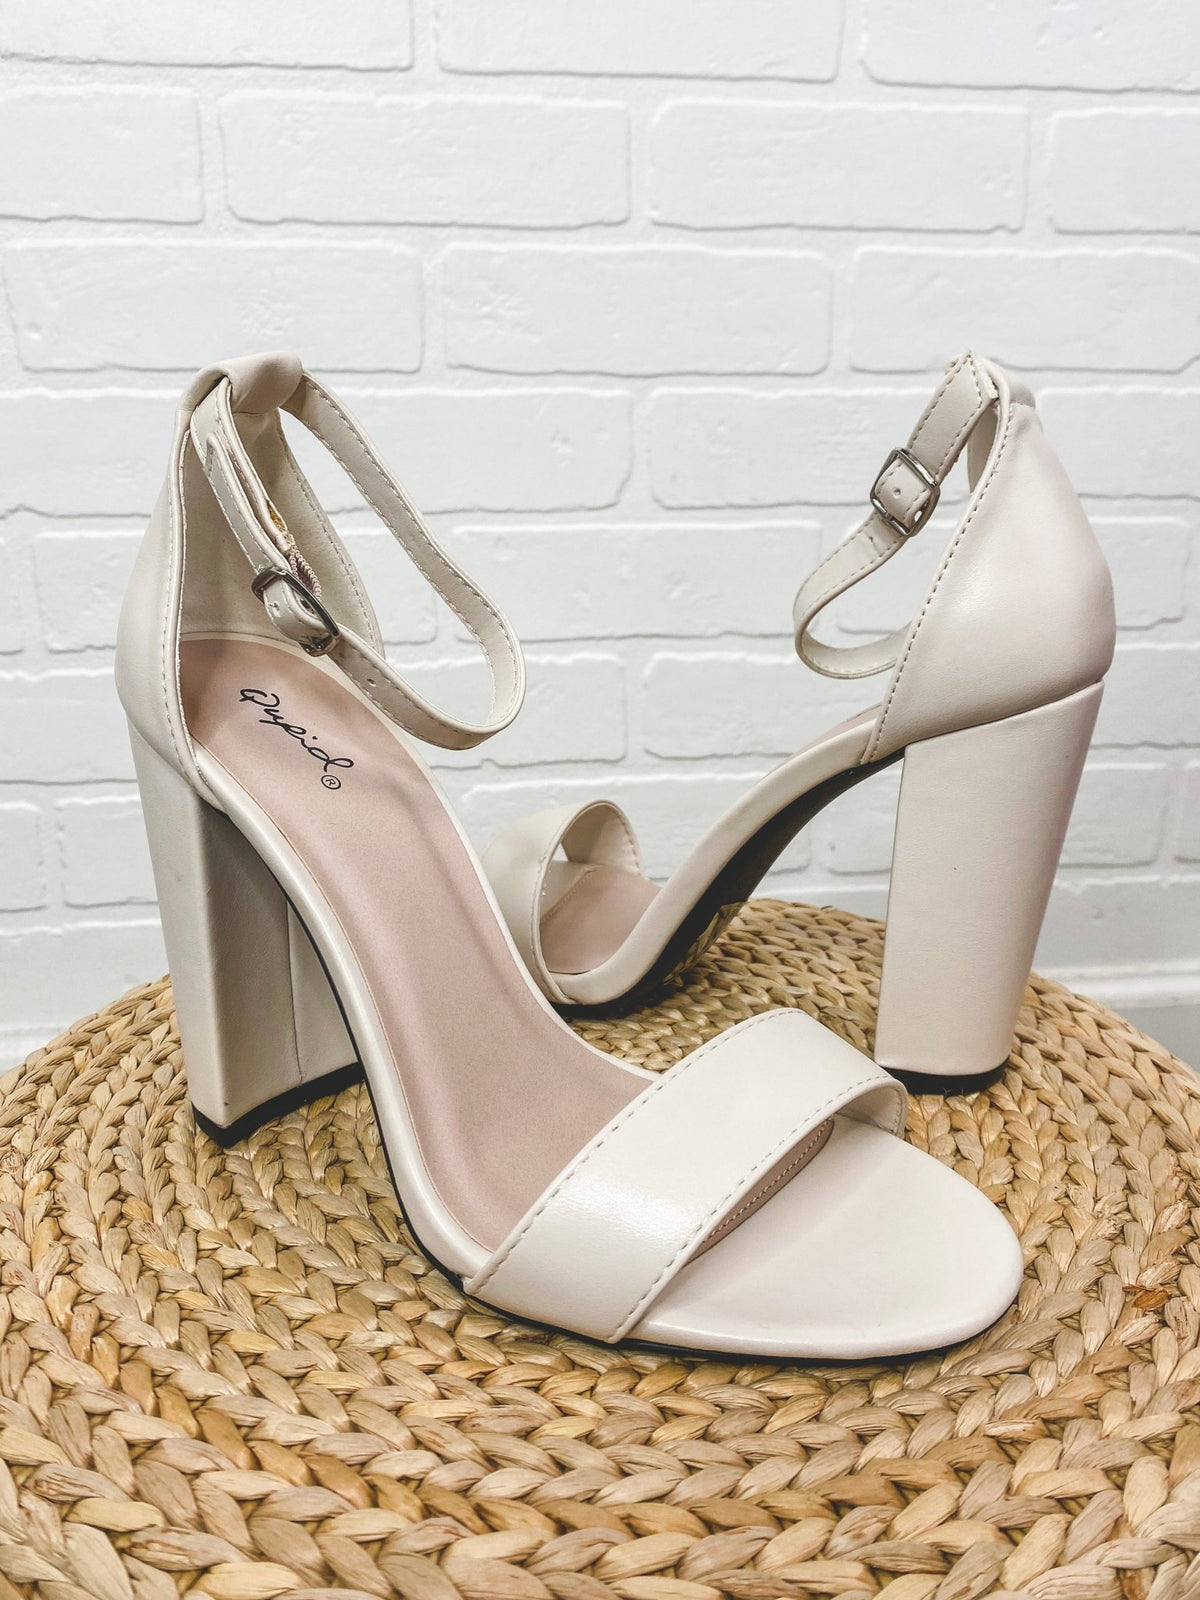 Cashmere ankle strap heel off white - Trendy New Year's Eve Outfits at Lush Fashion Lounge Boutique in Oklahoma City